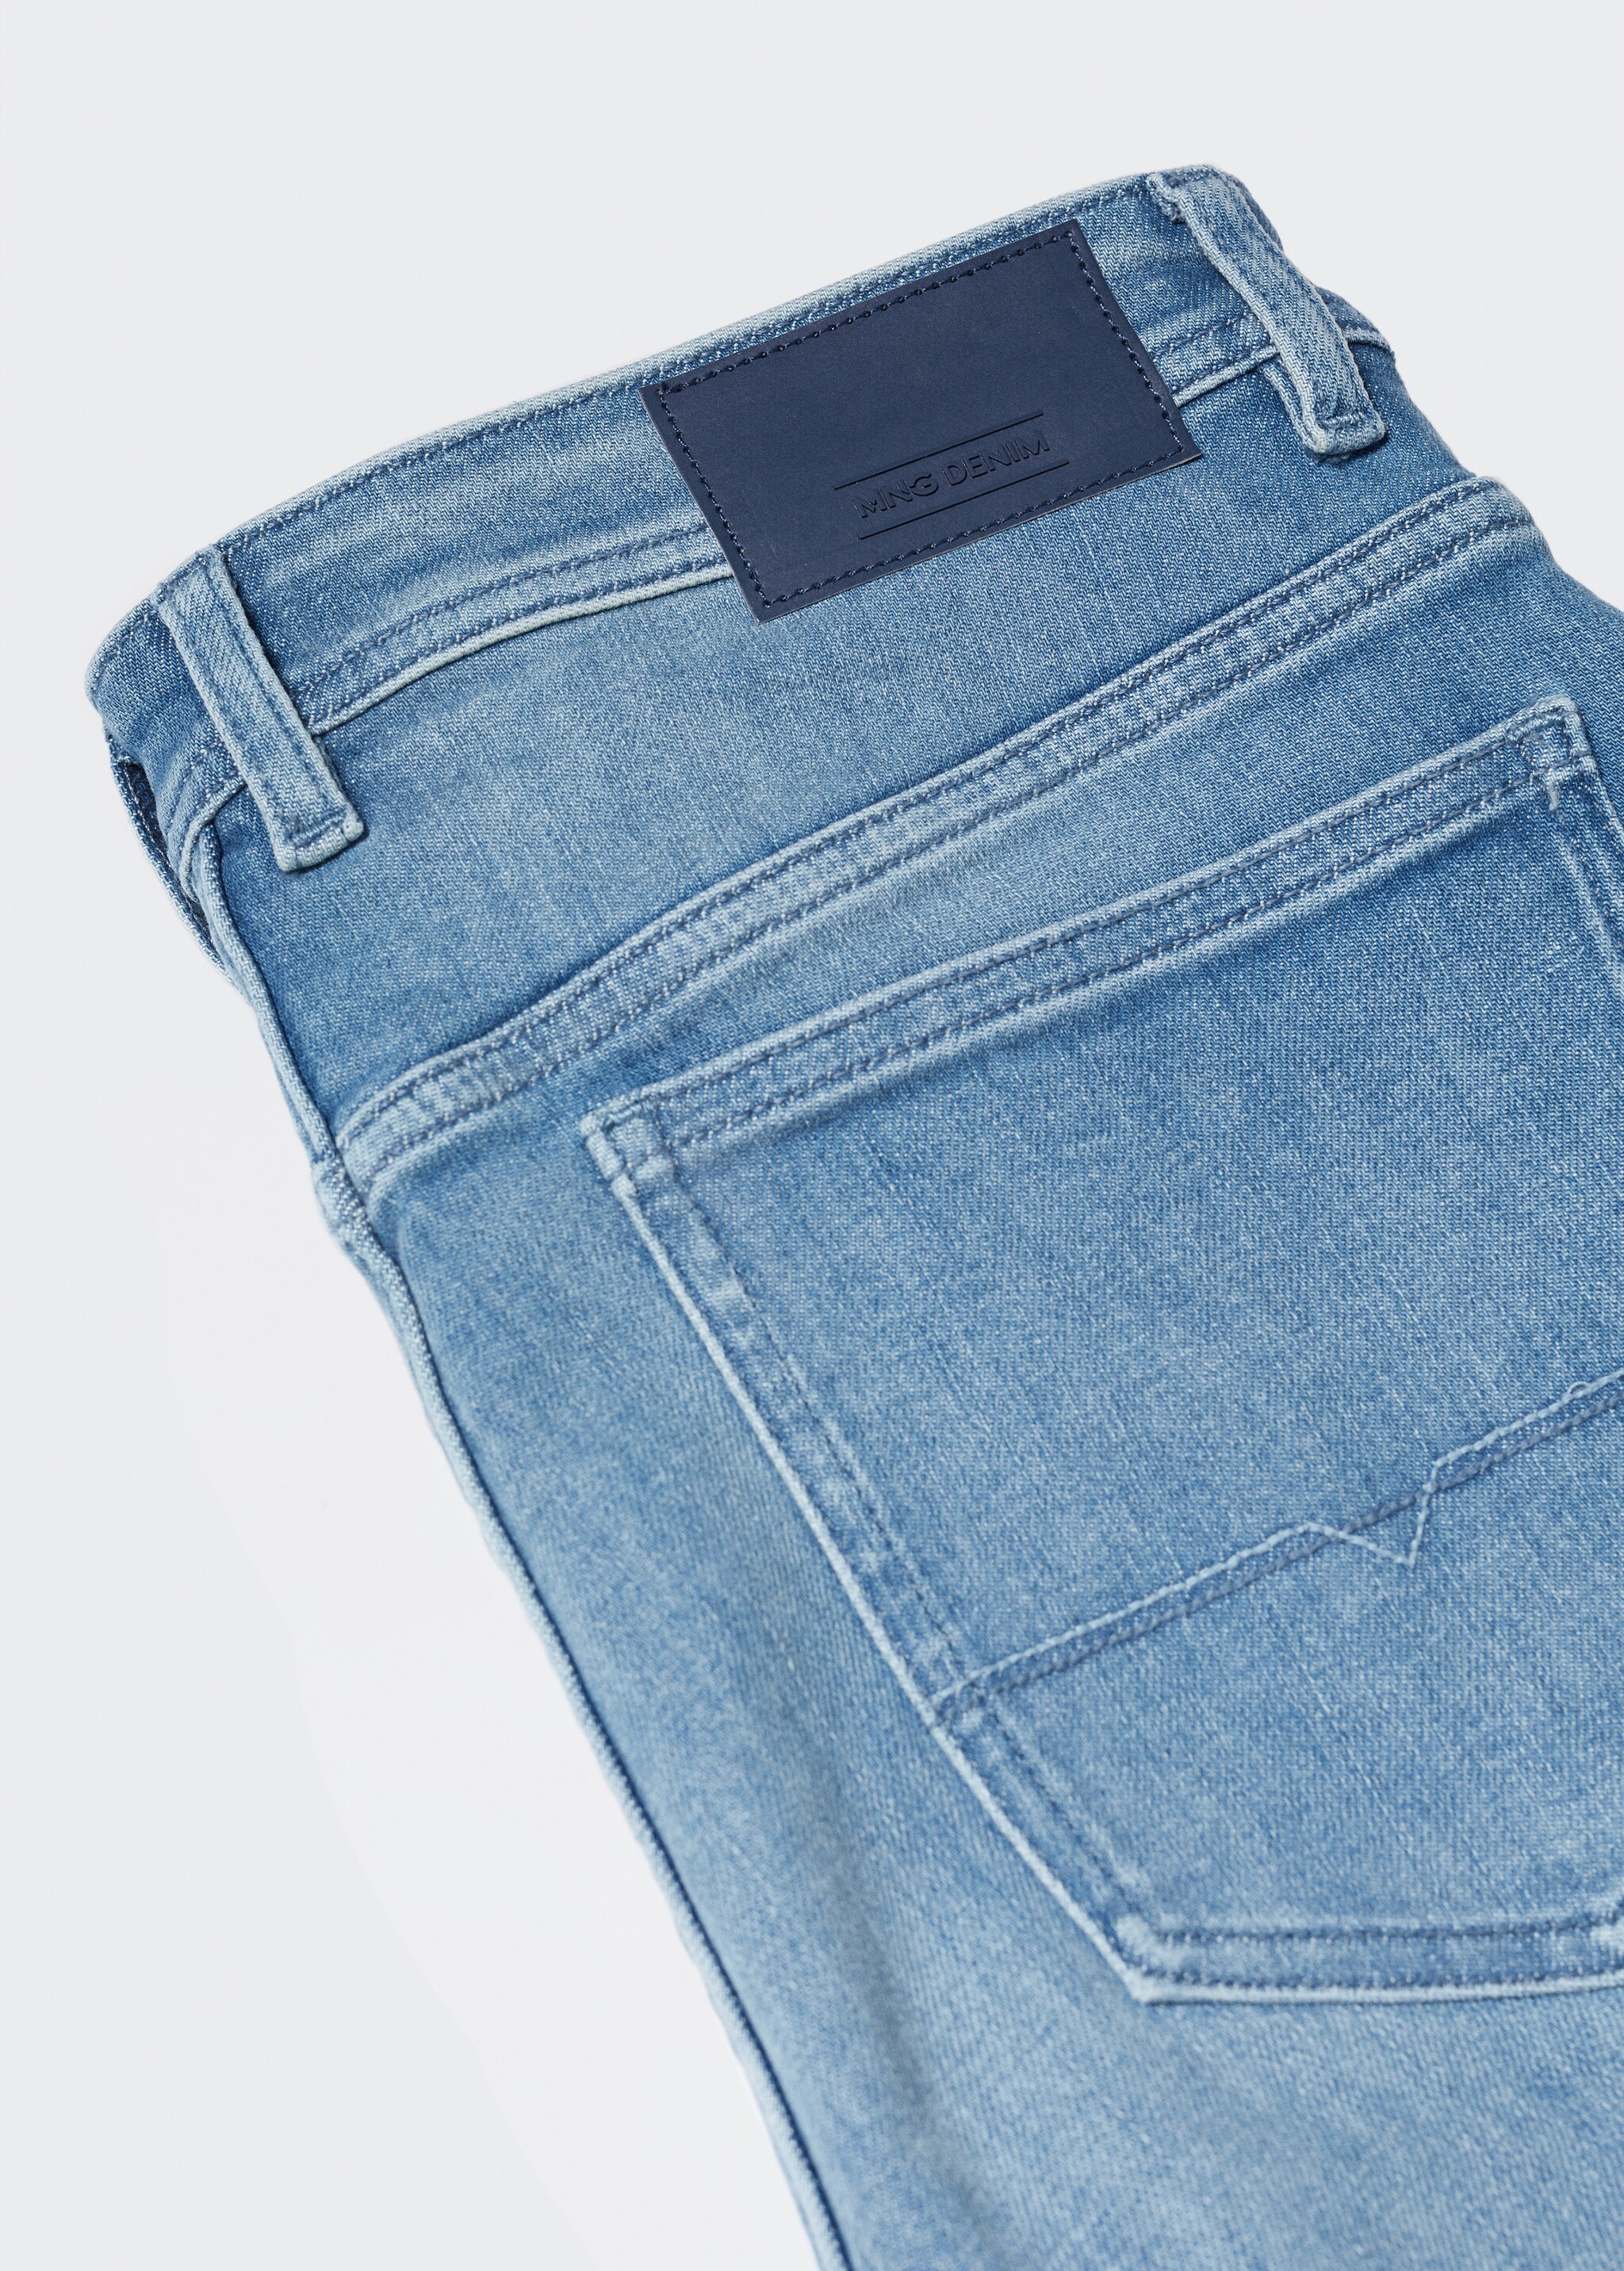 Premium skinny jeans - Details of the article 8